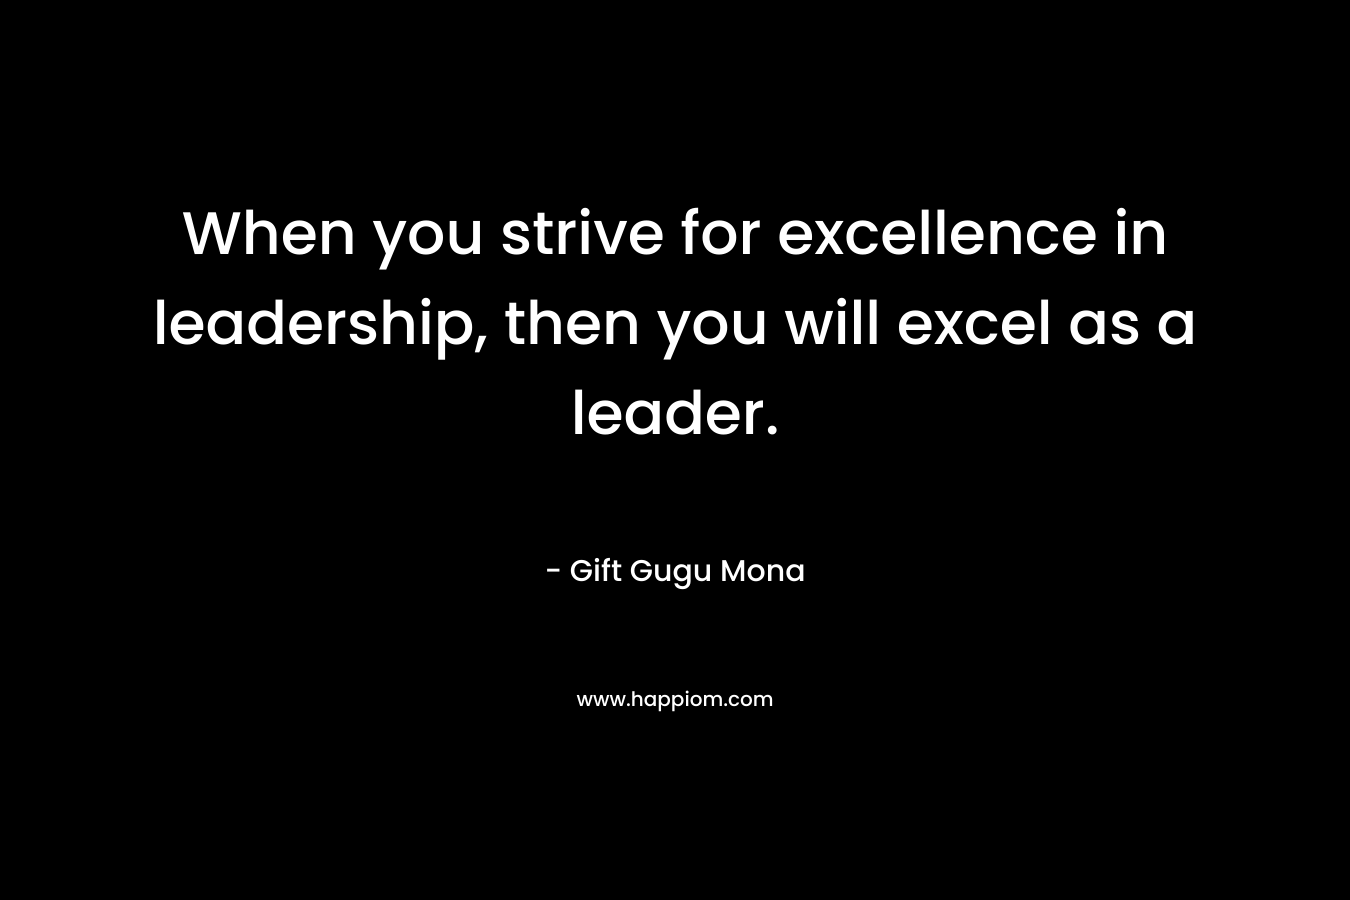 When you strive for excellence in leadership, then you will excel as a leader.